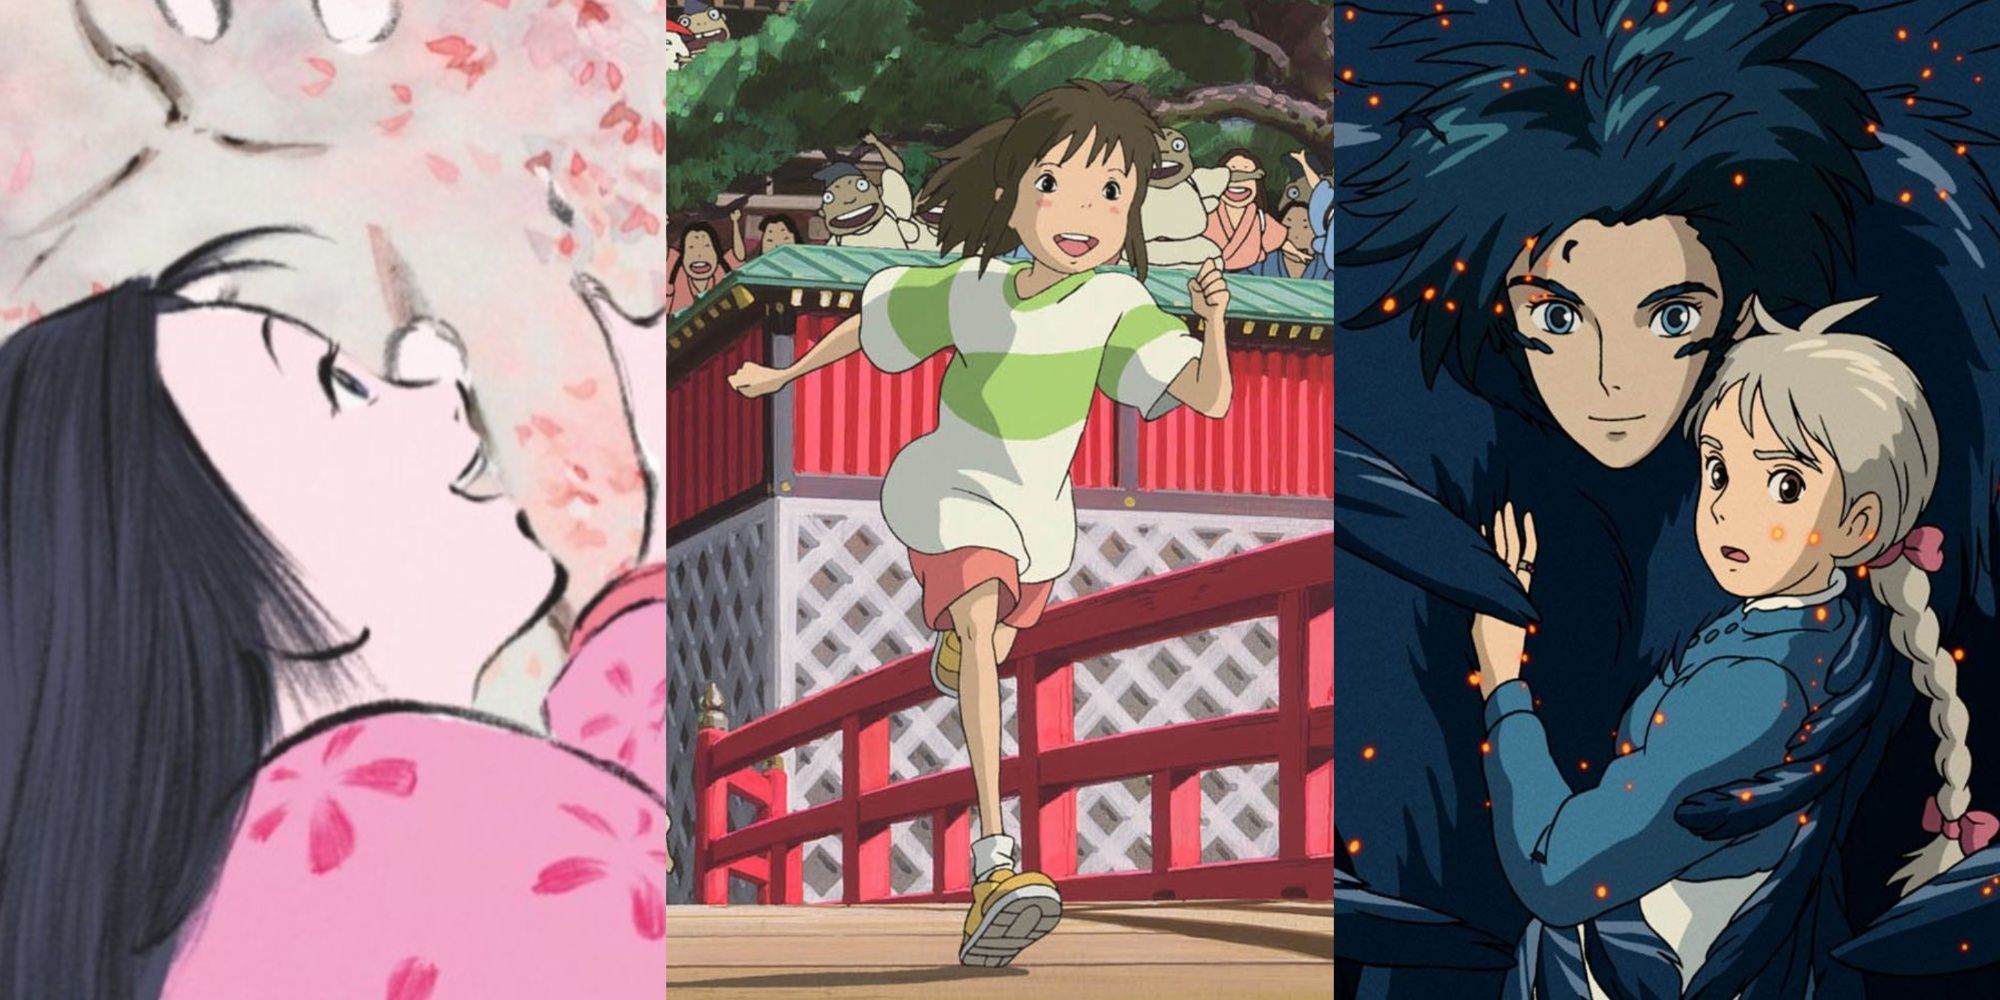 Split images of the Tale of the Princess Kaguya, Spirited Away, and Howl's Moving Castle